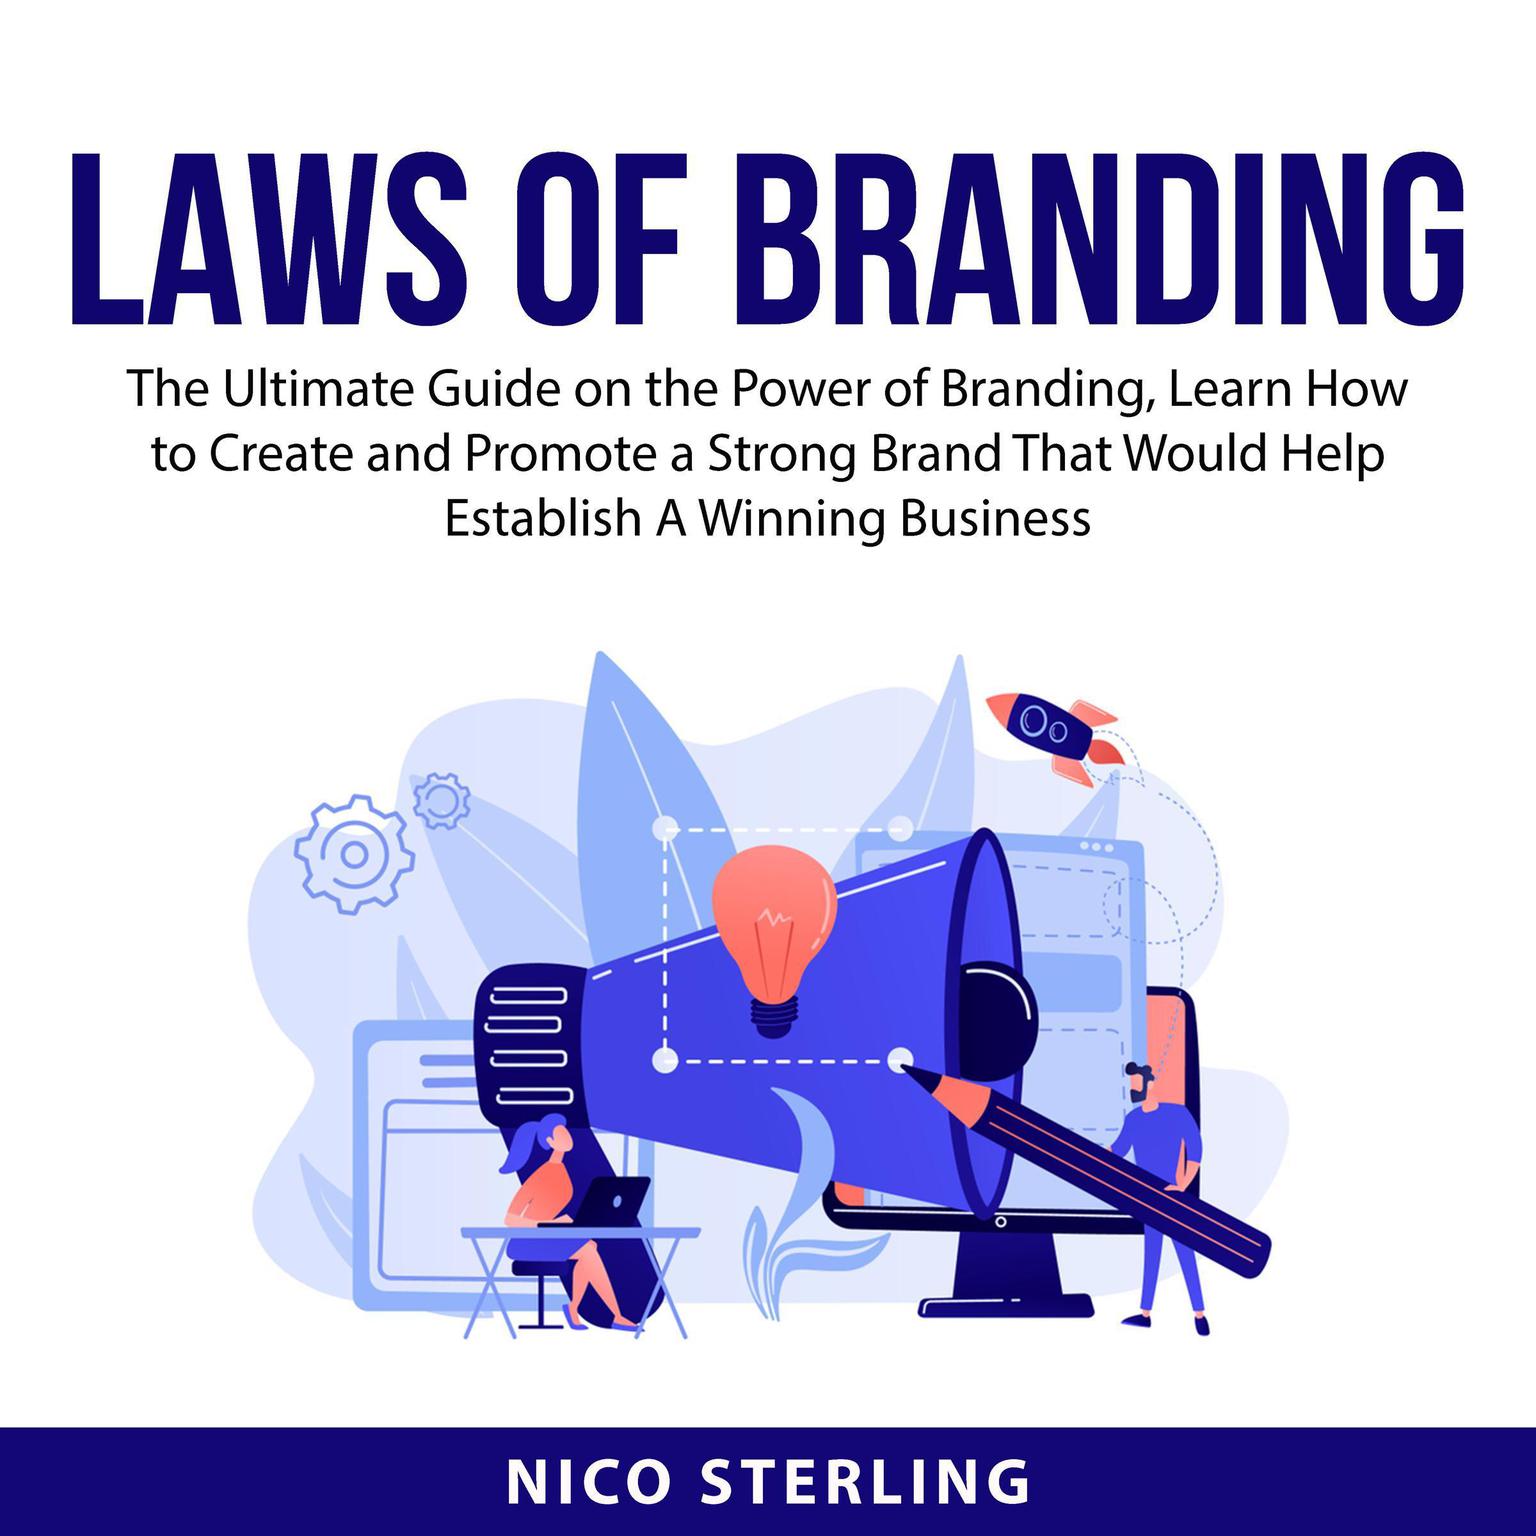 Laws of Branding: The Ultimate Guide on the Power of Branding, Learn How to Create and Promote a Strong Brand That Would Help Establish A Winning Business  Audiobook, by Nico Sterling